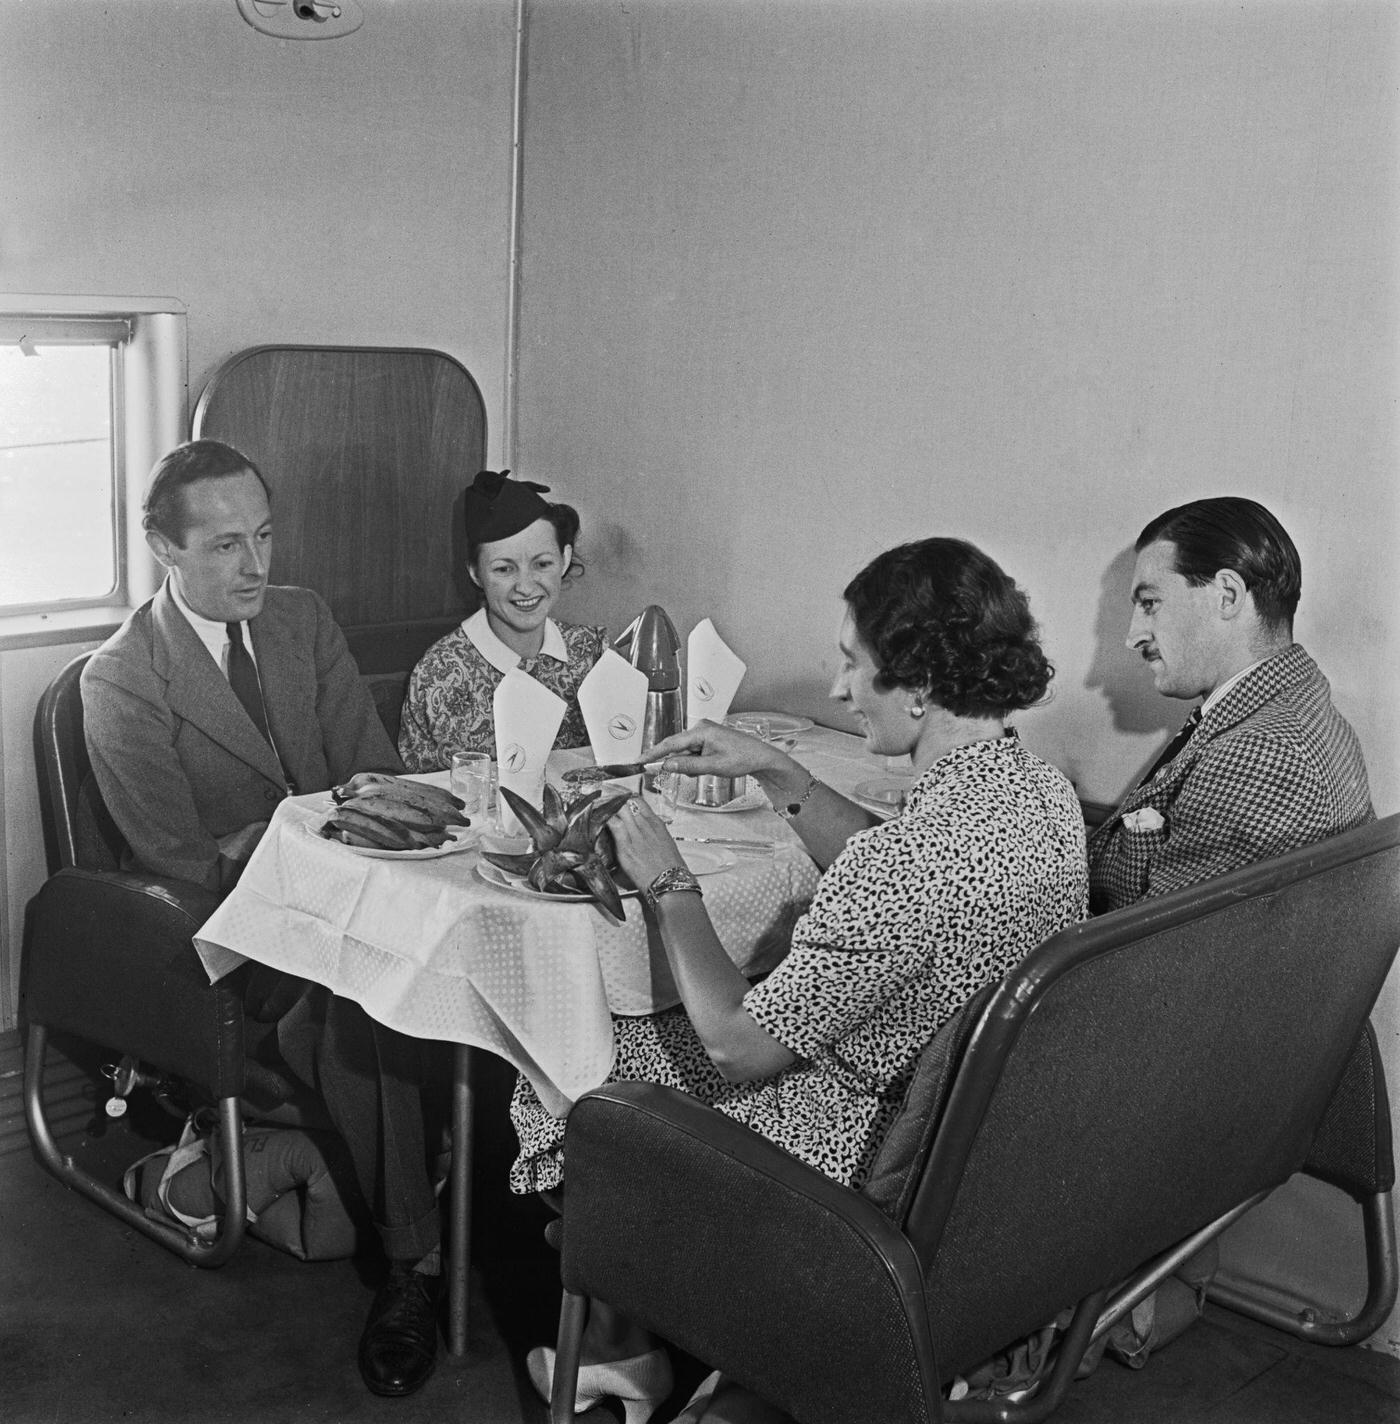 Four passengers are enjoying a meal at a table aboard the British Overseas Airways Corporation (BOAC) Boeing 314A Clipper flying boat Berwick on an international flight from England during World War II on 31st August 1942.